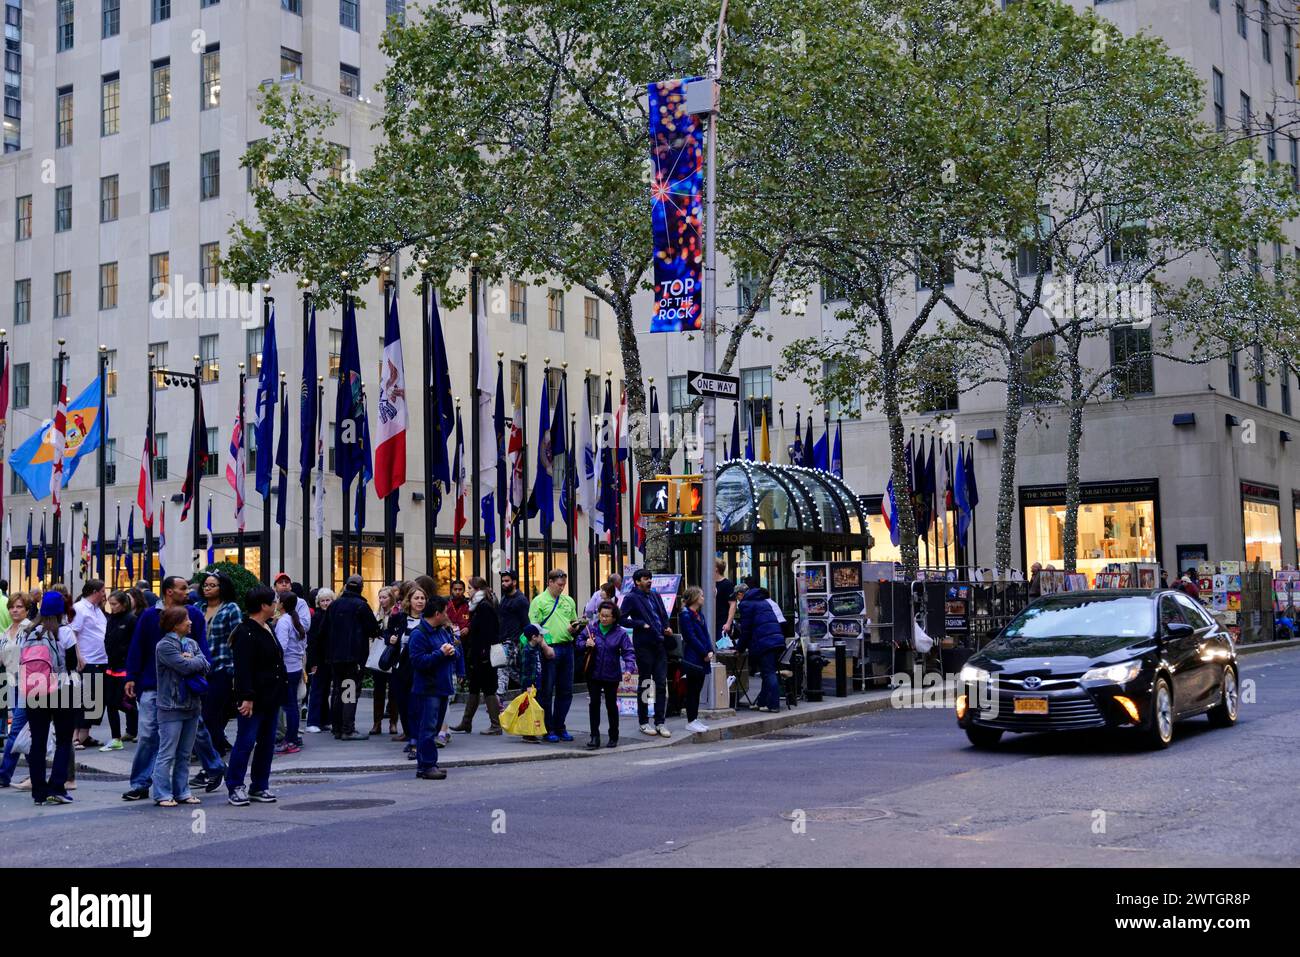 Crowd in front of buildings on a city street with numerous flags, Manhattan, New York City, New York, USA, North America Stock Photo